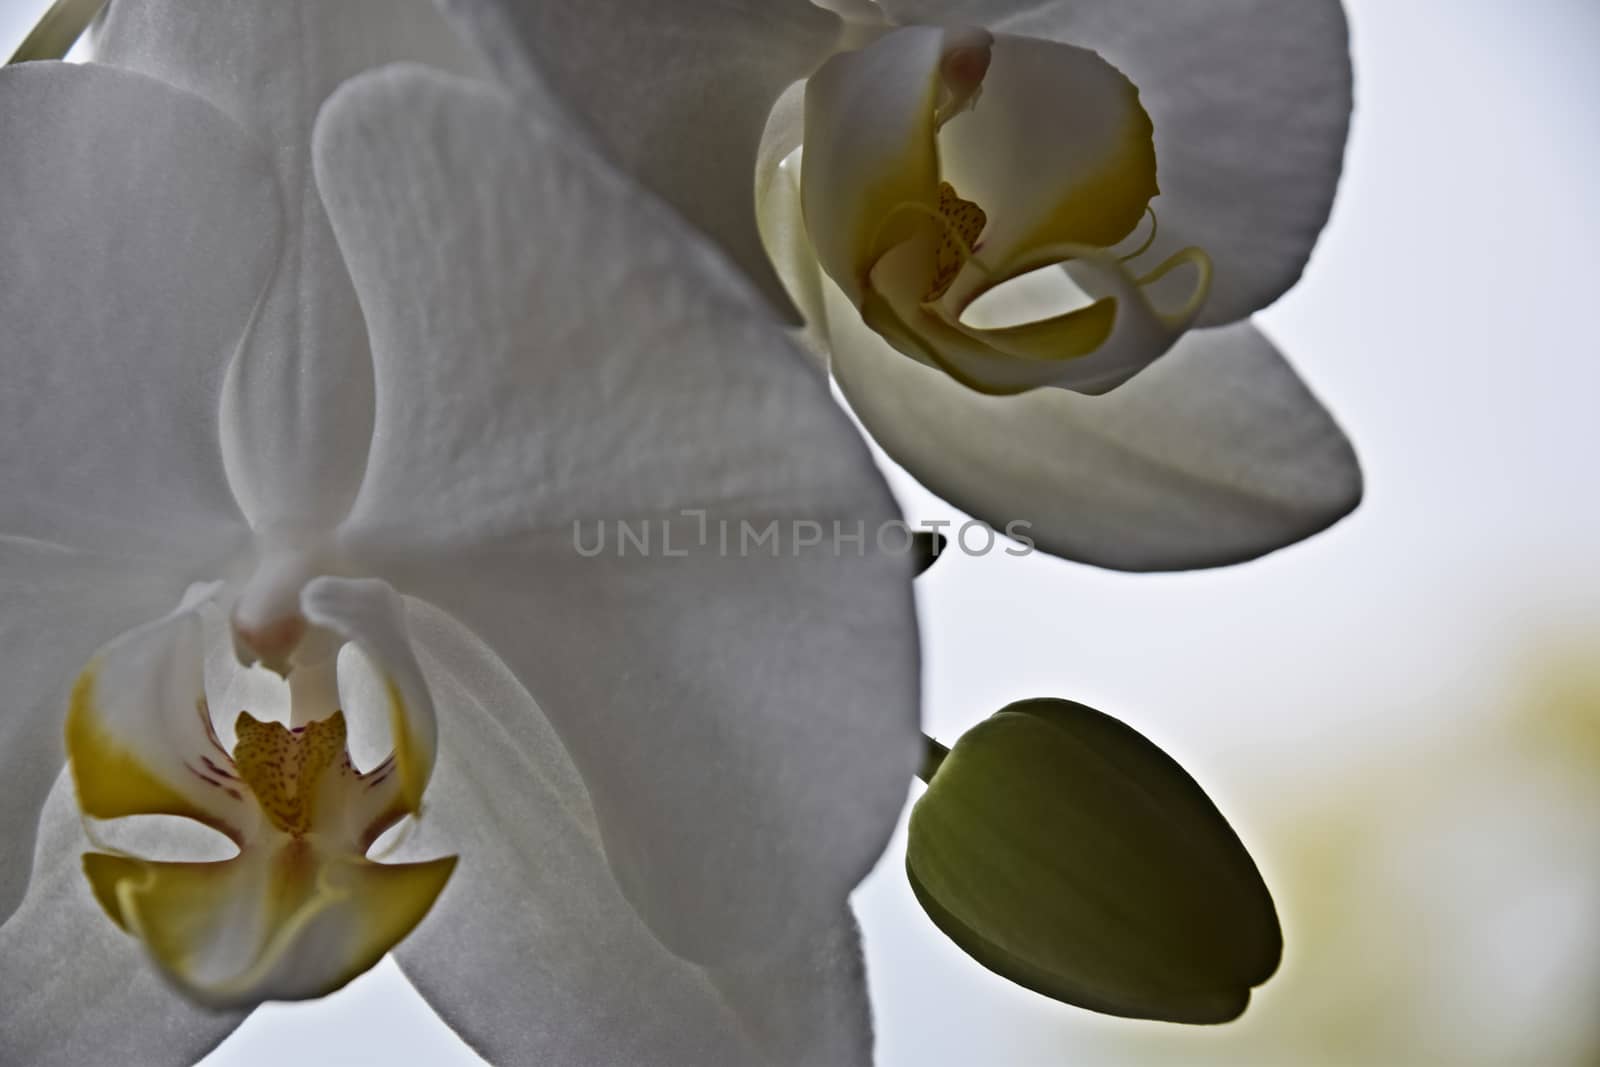 UK, JUNE 2015: White Orchid - close up